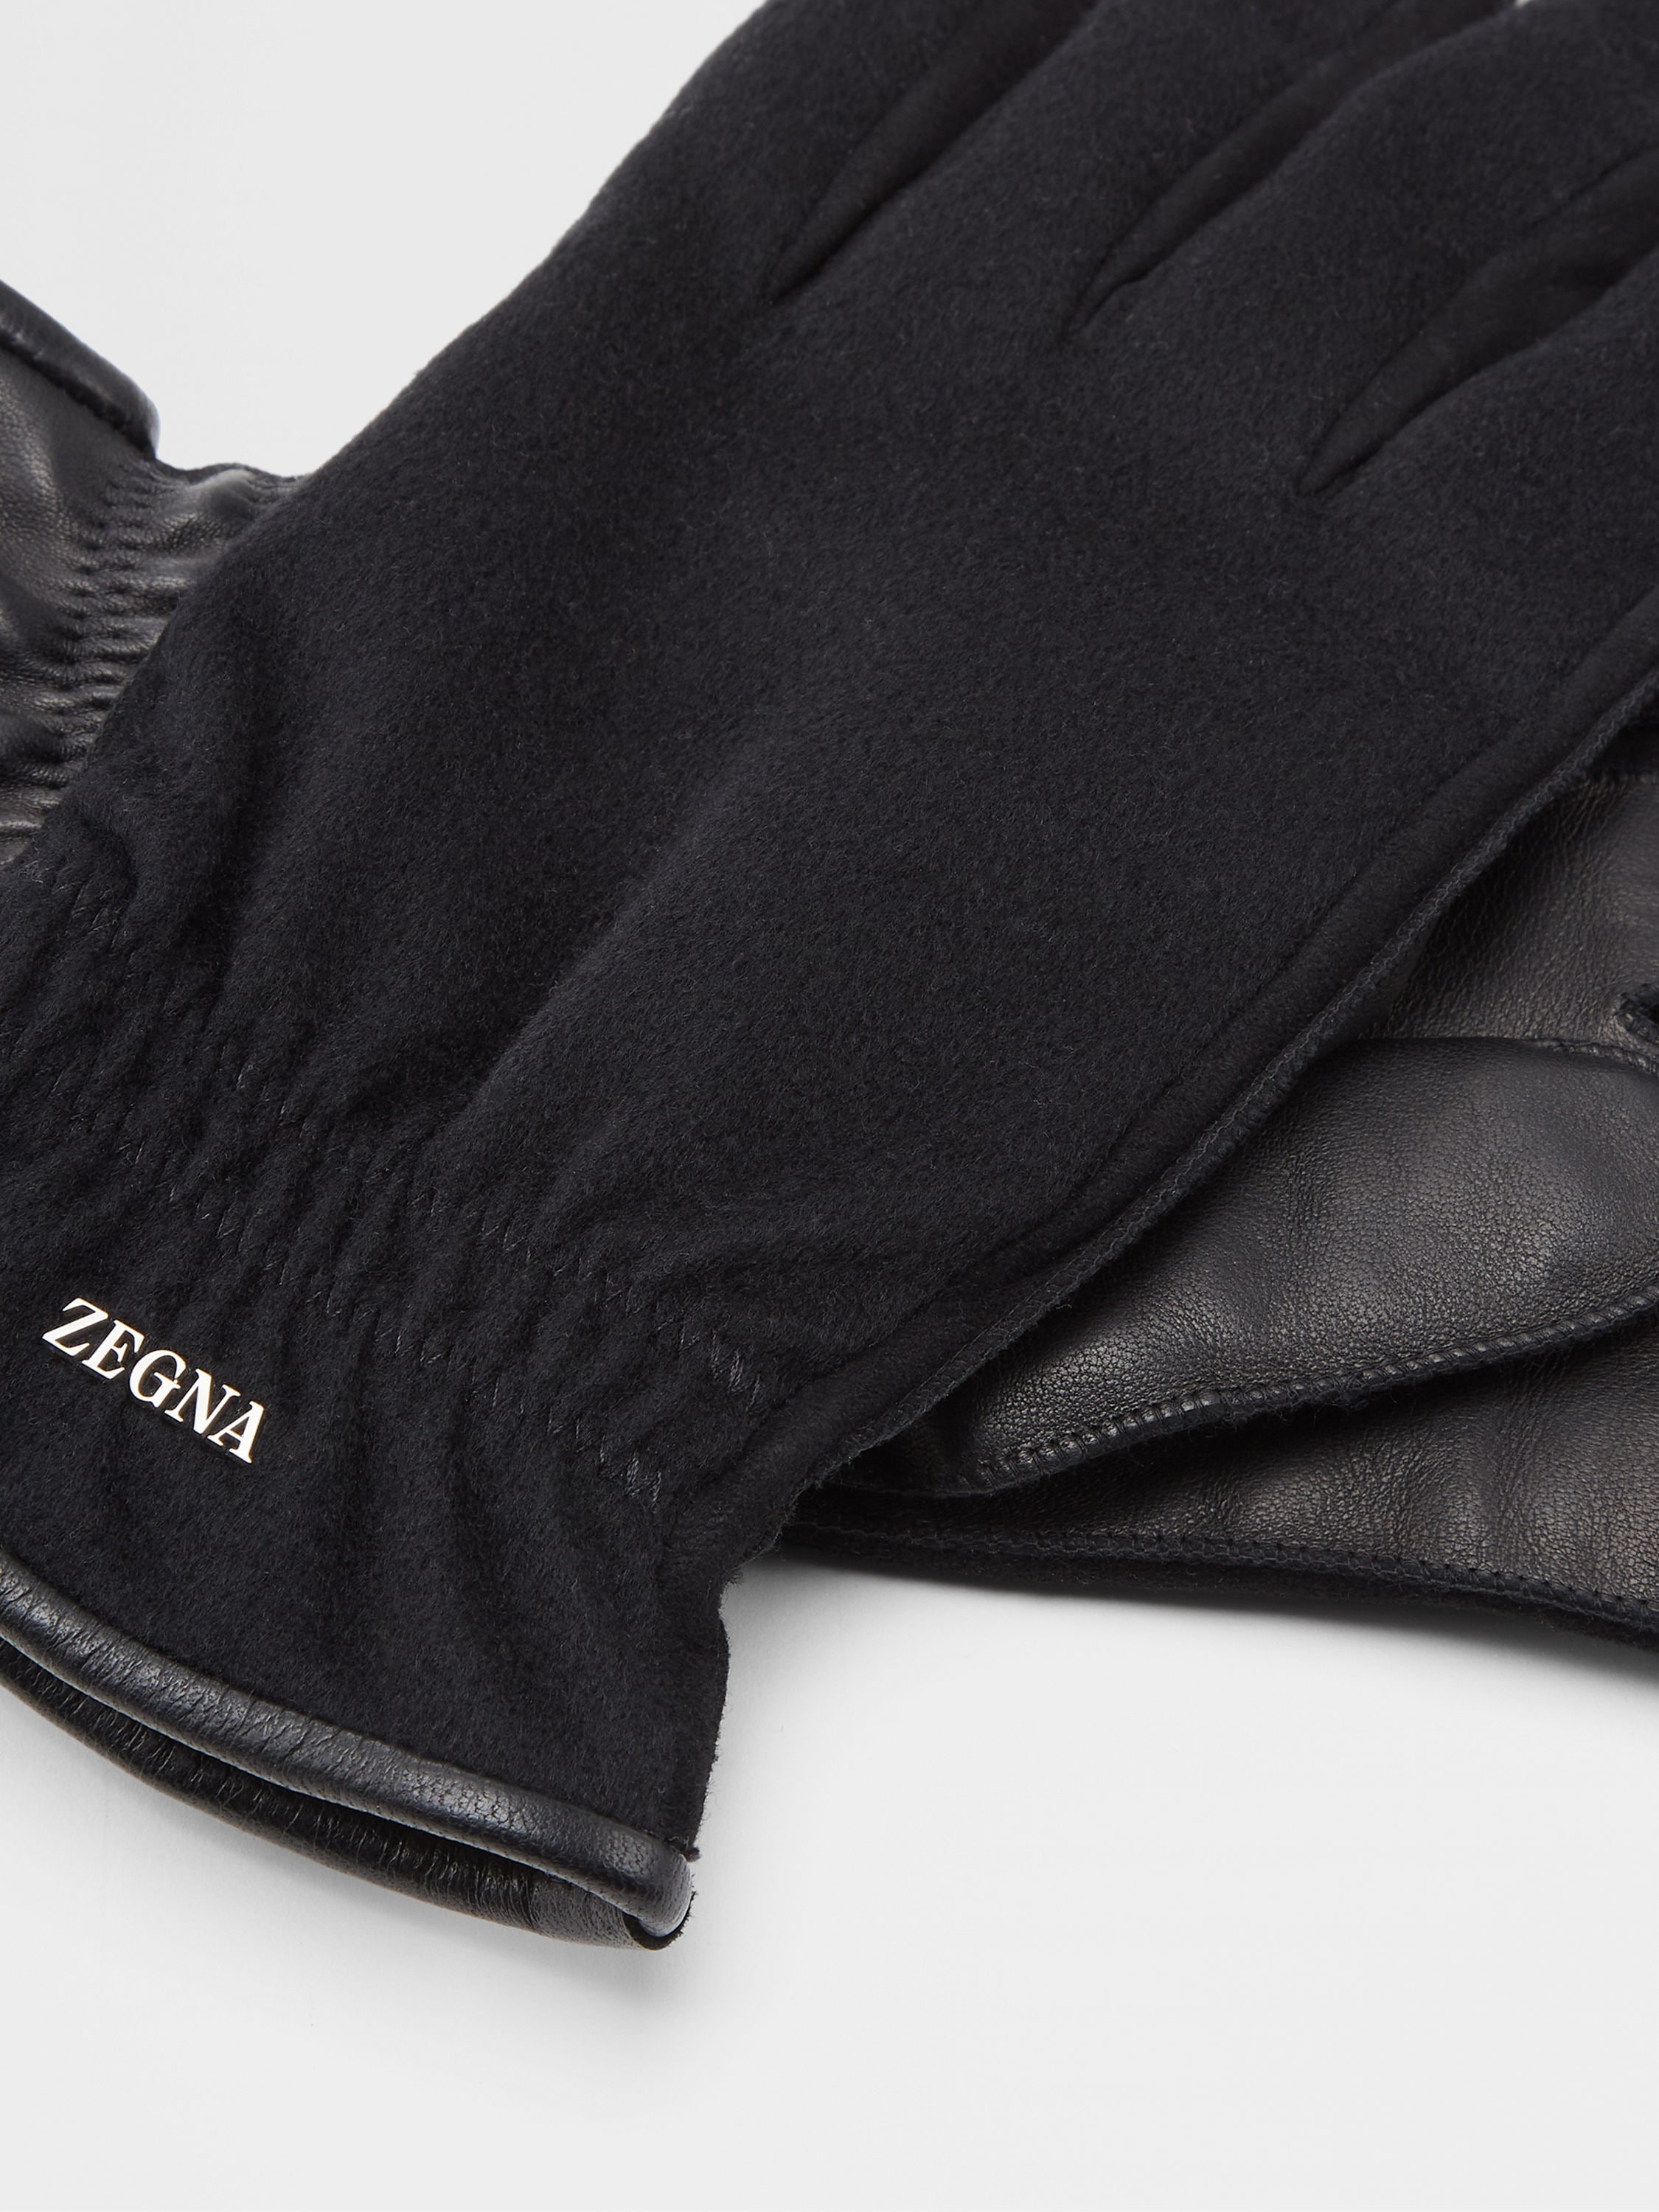 BLACK OASI CASHMERE AND LEATHER GLOVES - 2